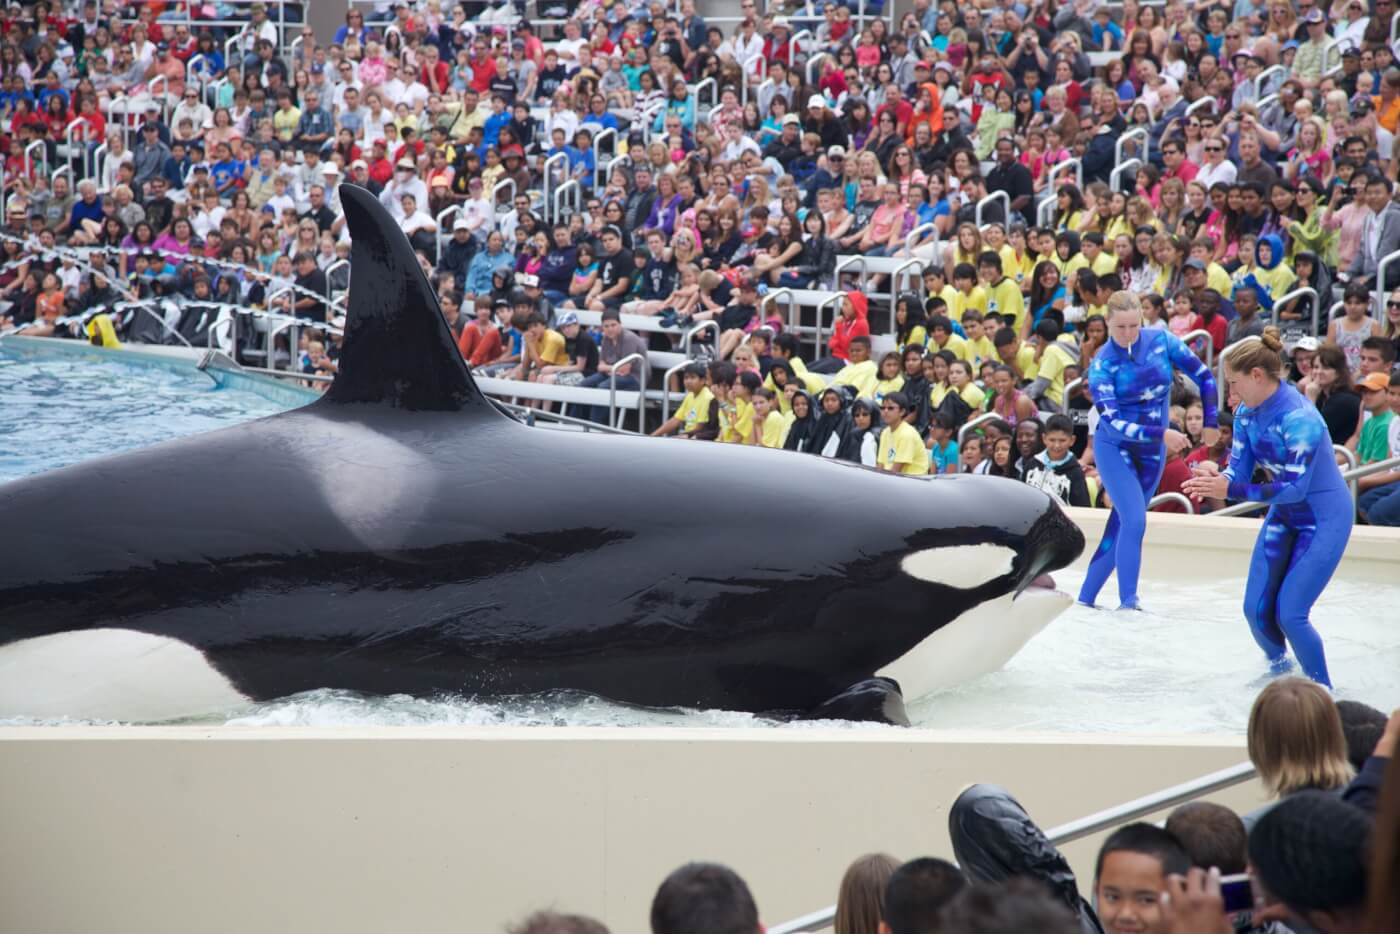 Corky at SeaWorld San Diego in the tank with trainers